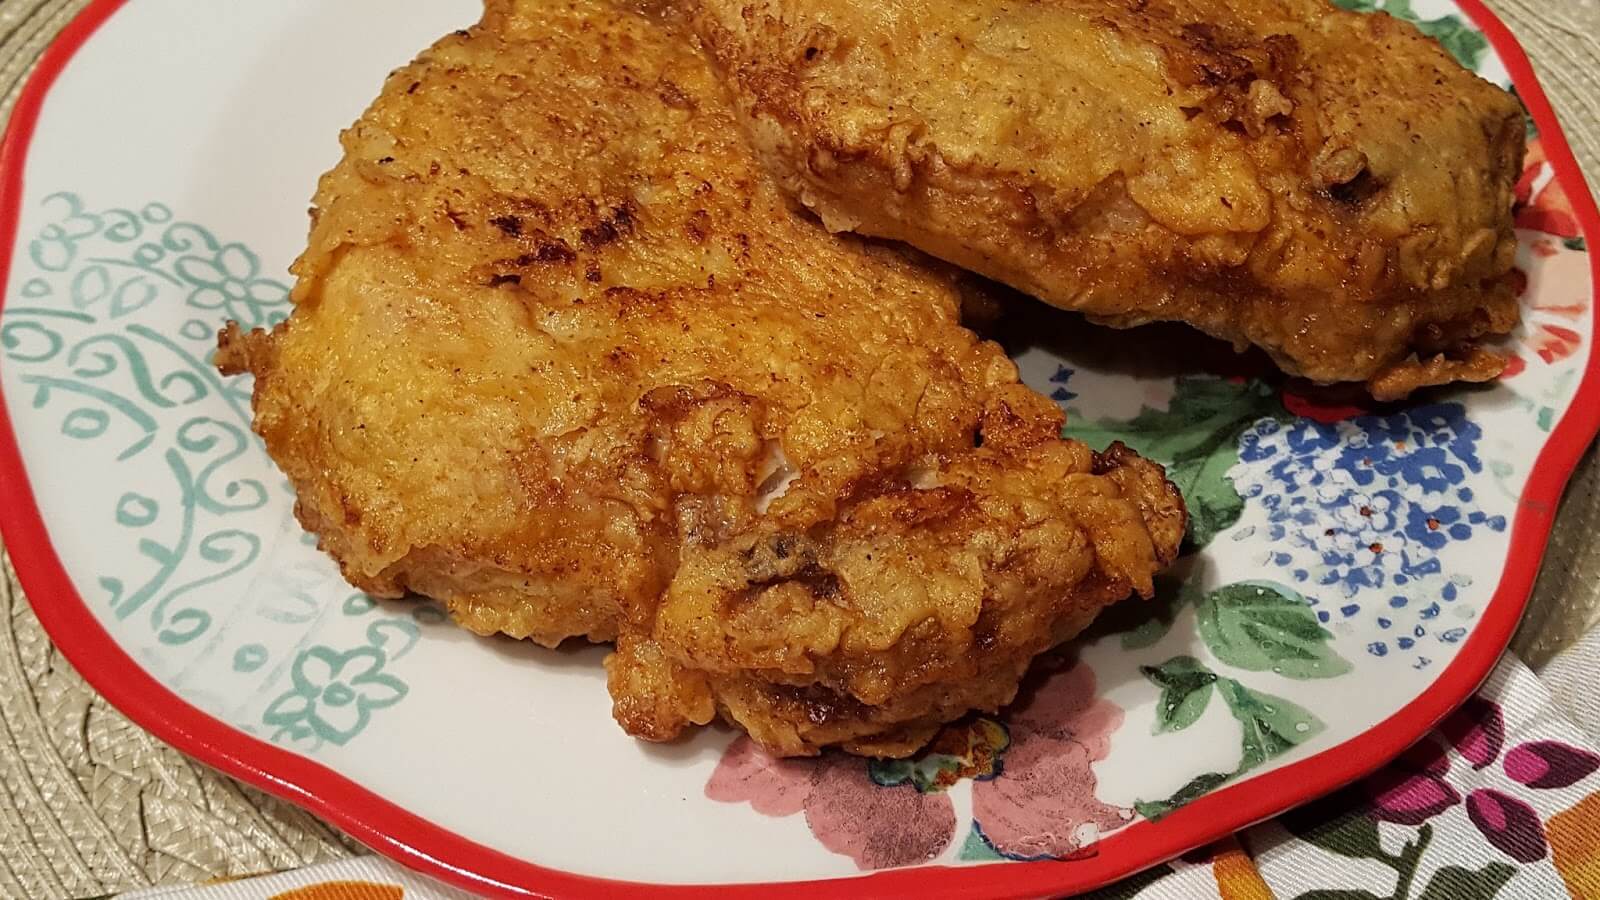 Delicious Southern Fried Pork Chops on a plate